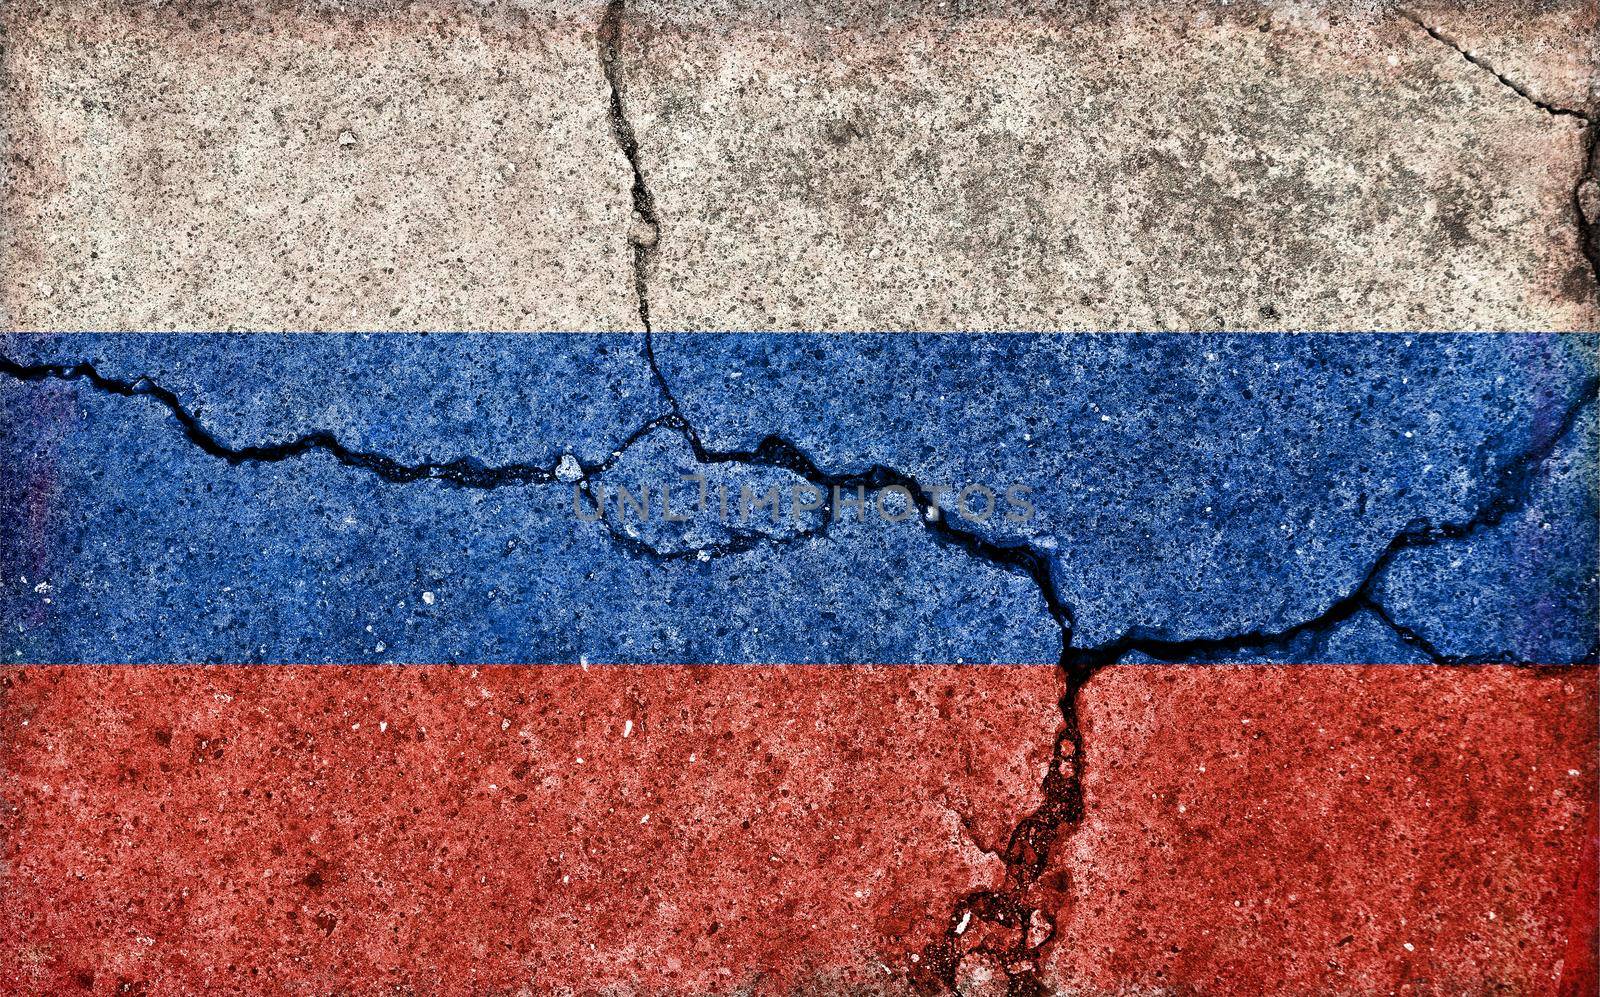 Grunge country flag illustration (cracked concrete background) / Russia by barks